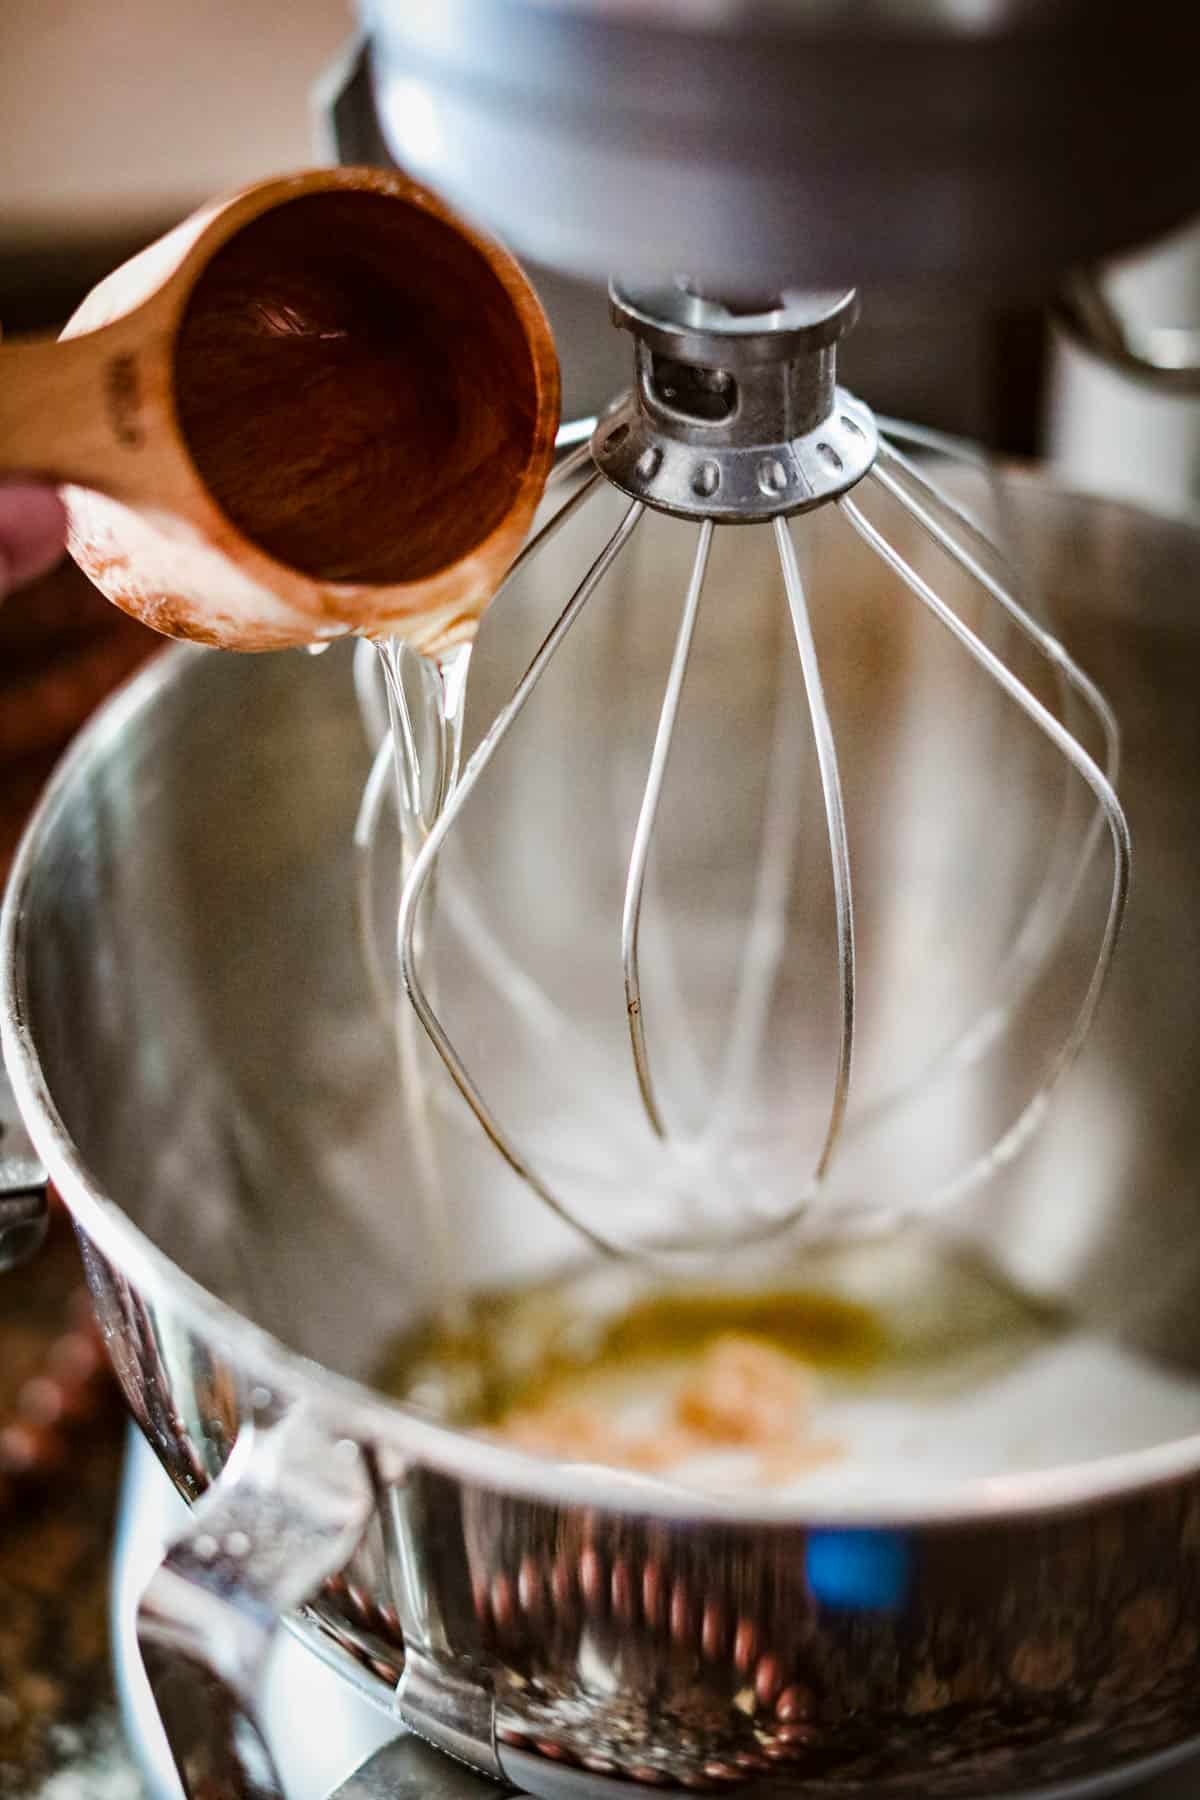 A person mixing apple cider and donut ingredients in a bowl with a wooden spoon.